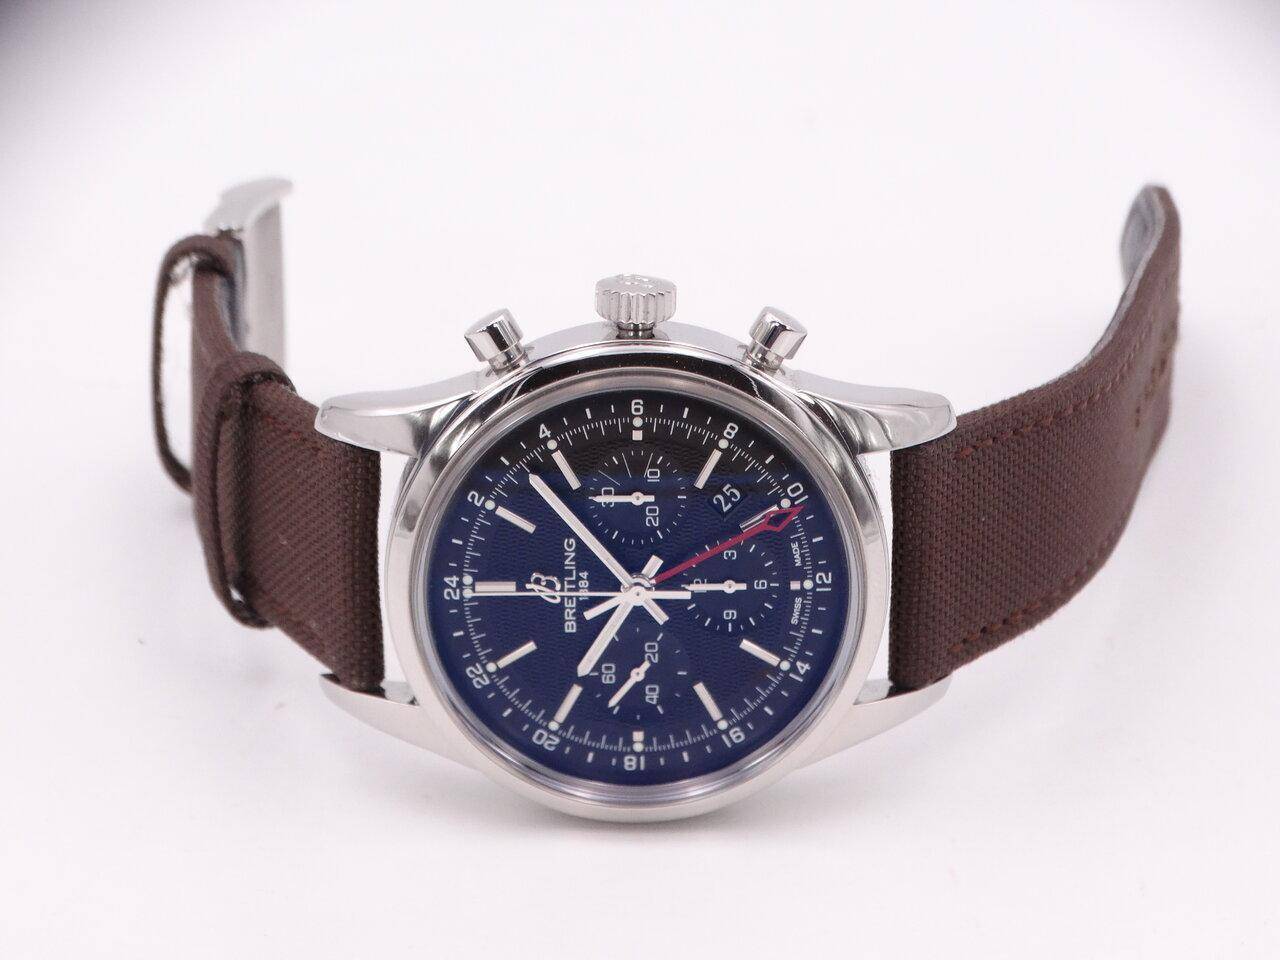 Breitling Transocean Chronograph GMT Limited Edition 00593.JPG